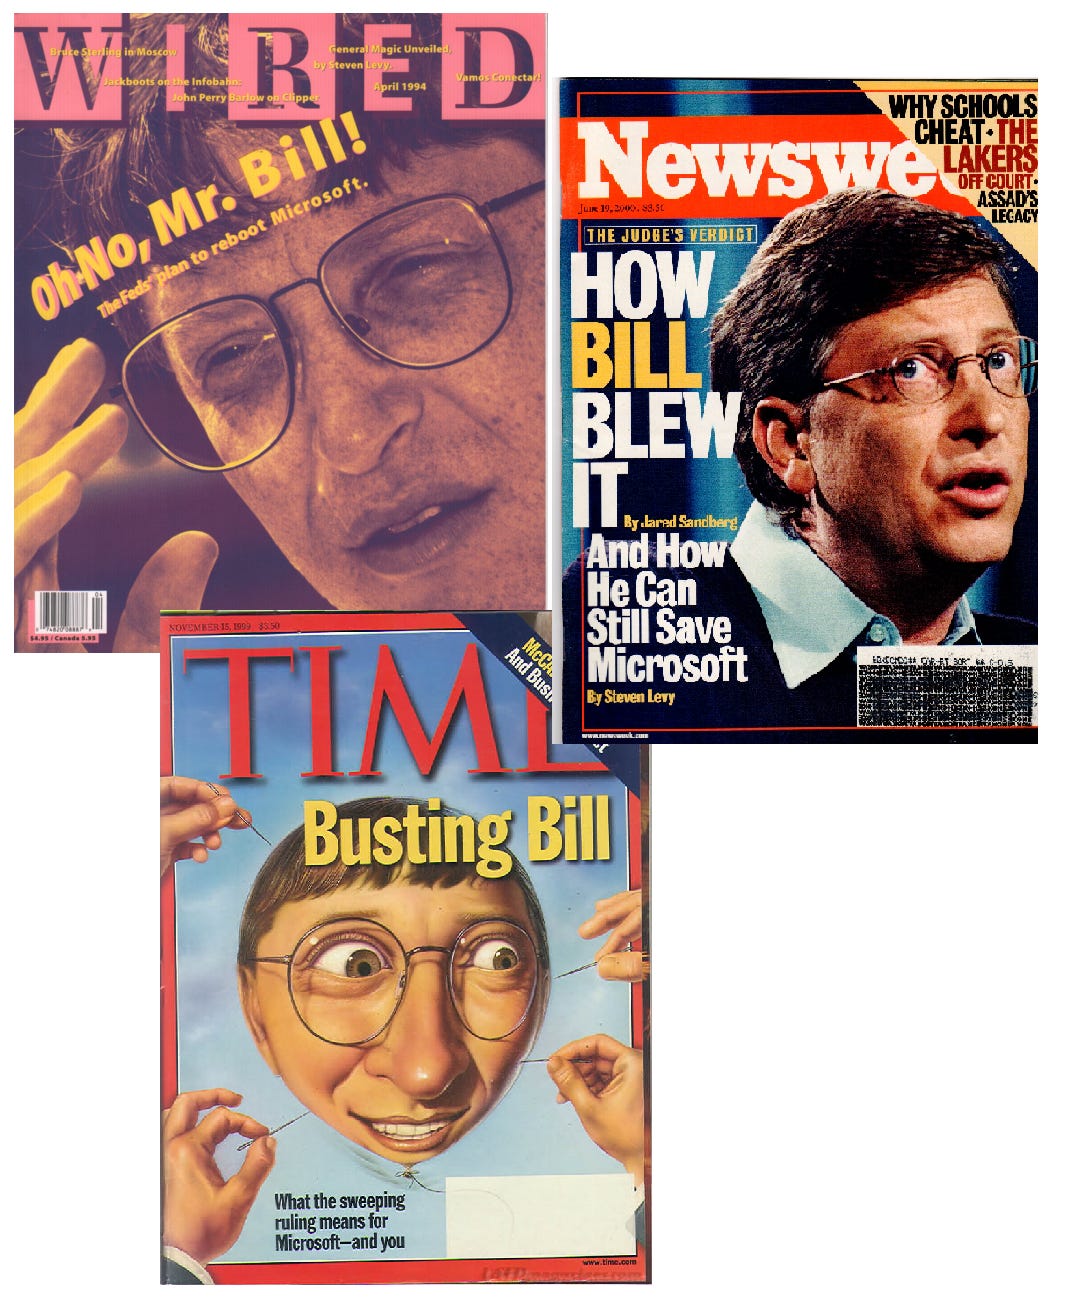 Wired: Oh No Mr Bill Newsweek: How Bill Blew It Time: Busting Bill